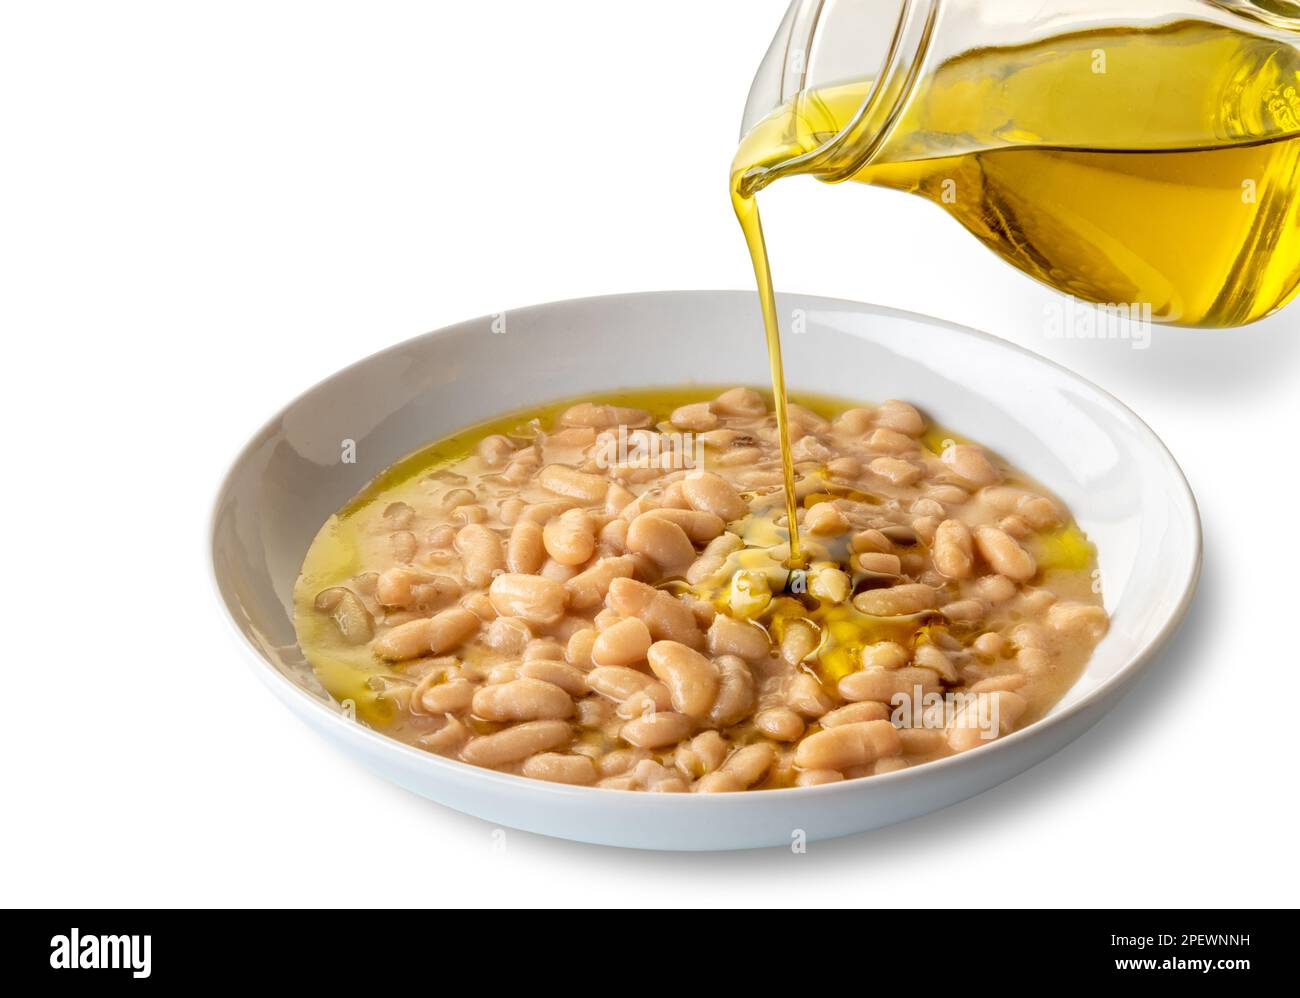 Extra virgin olive oil pouring from glass jug over bean soup in white dish isolated on white with clipping path included Stock Photo